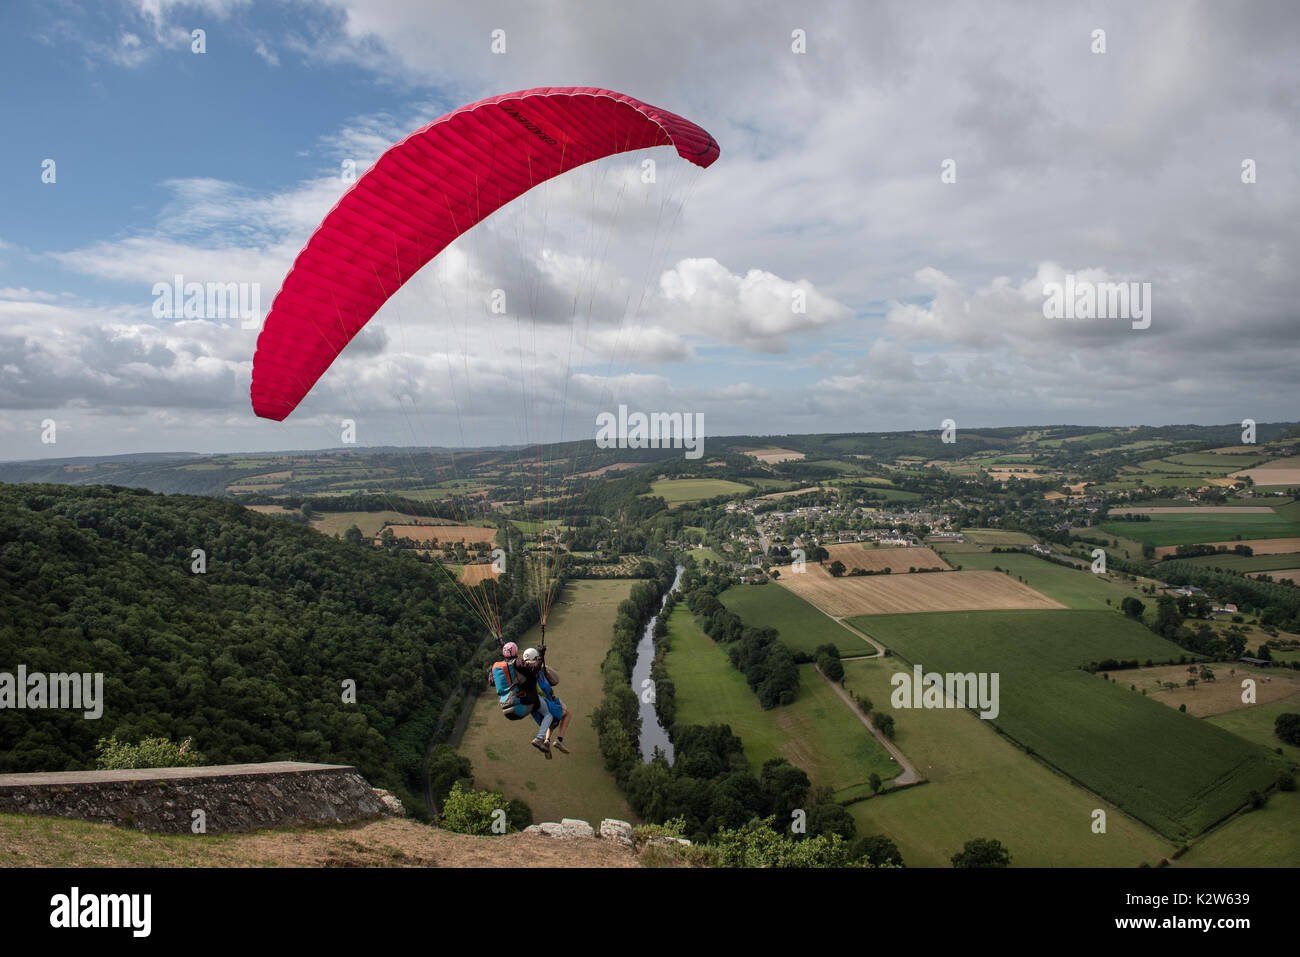 Suisse Normande, Swiss Normandy above Clecy France. August 2017 Paragliding from the Rochers de la Houle above Clecy and the Orne River near Le Pain d Stock Photo